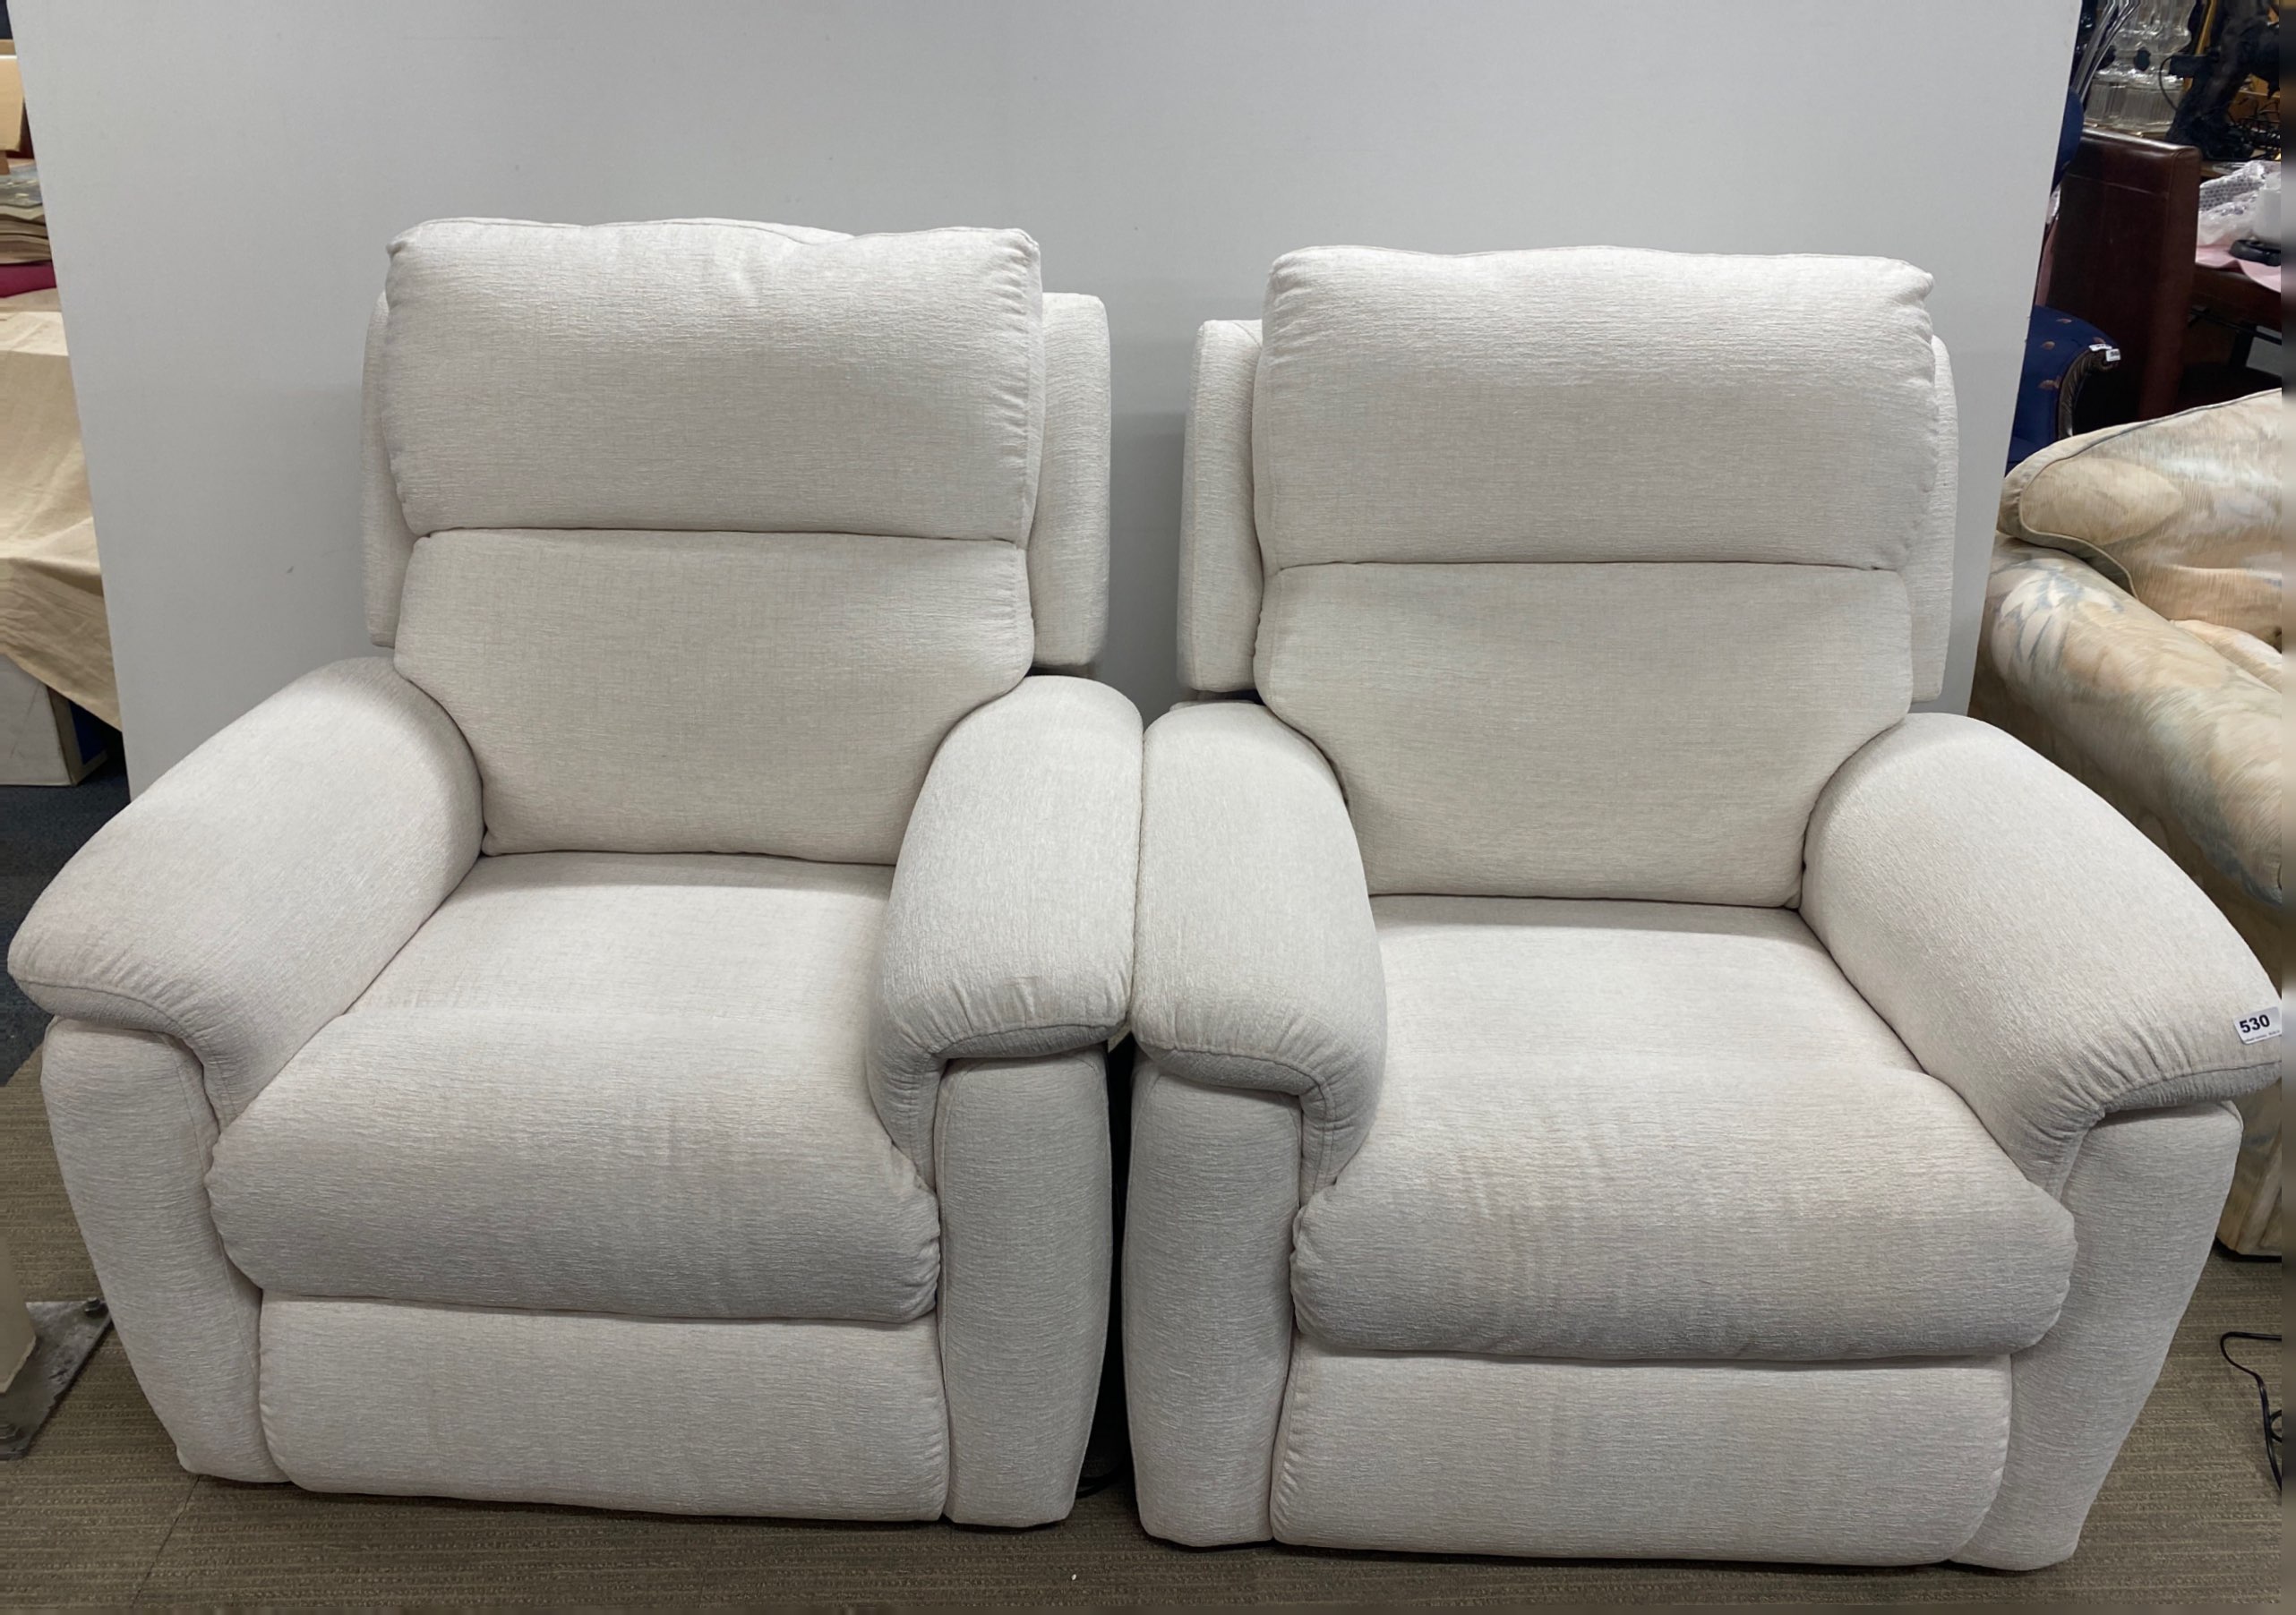 A pair of almost new electric recliner armchairs. - Image 2 of 2